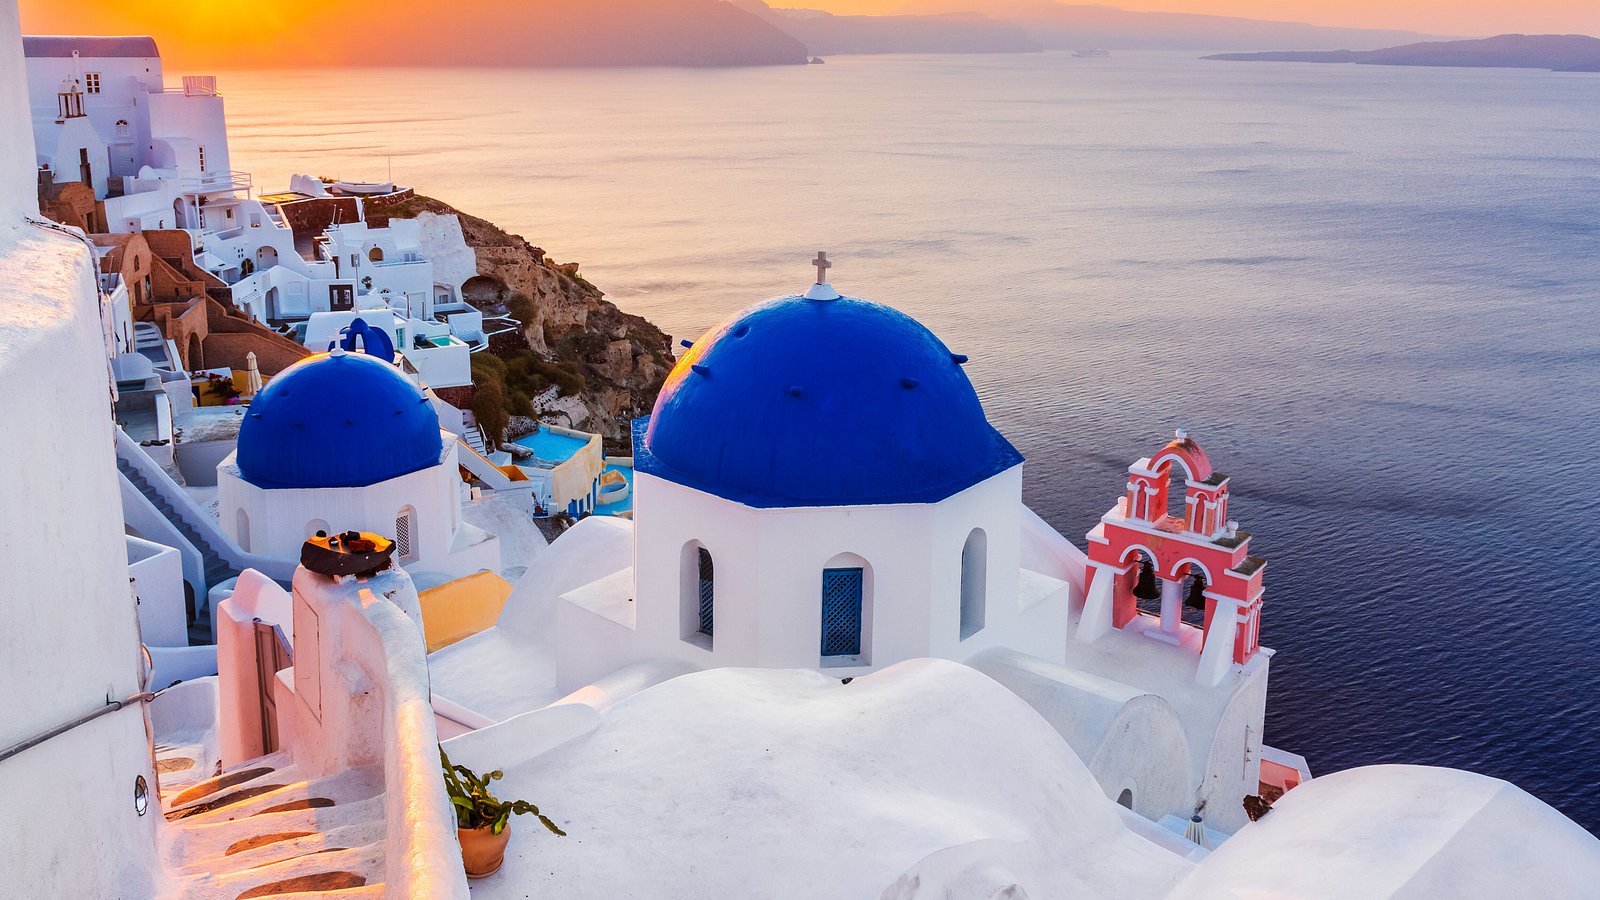 𝗧𝗛𝗘 𝟭𝟬 𝗕𝗘𝗦𝗧 Hotels in Santorini of 2023 (with Prices)